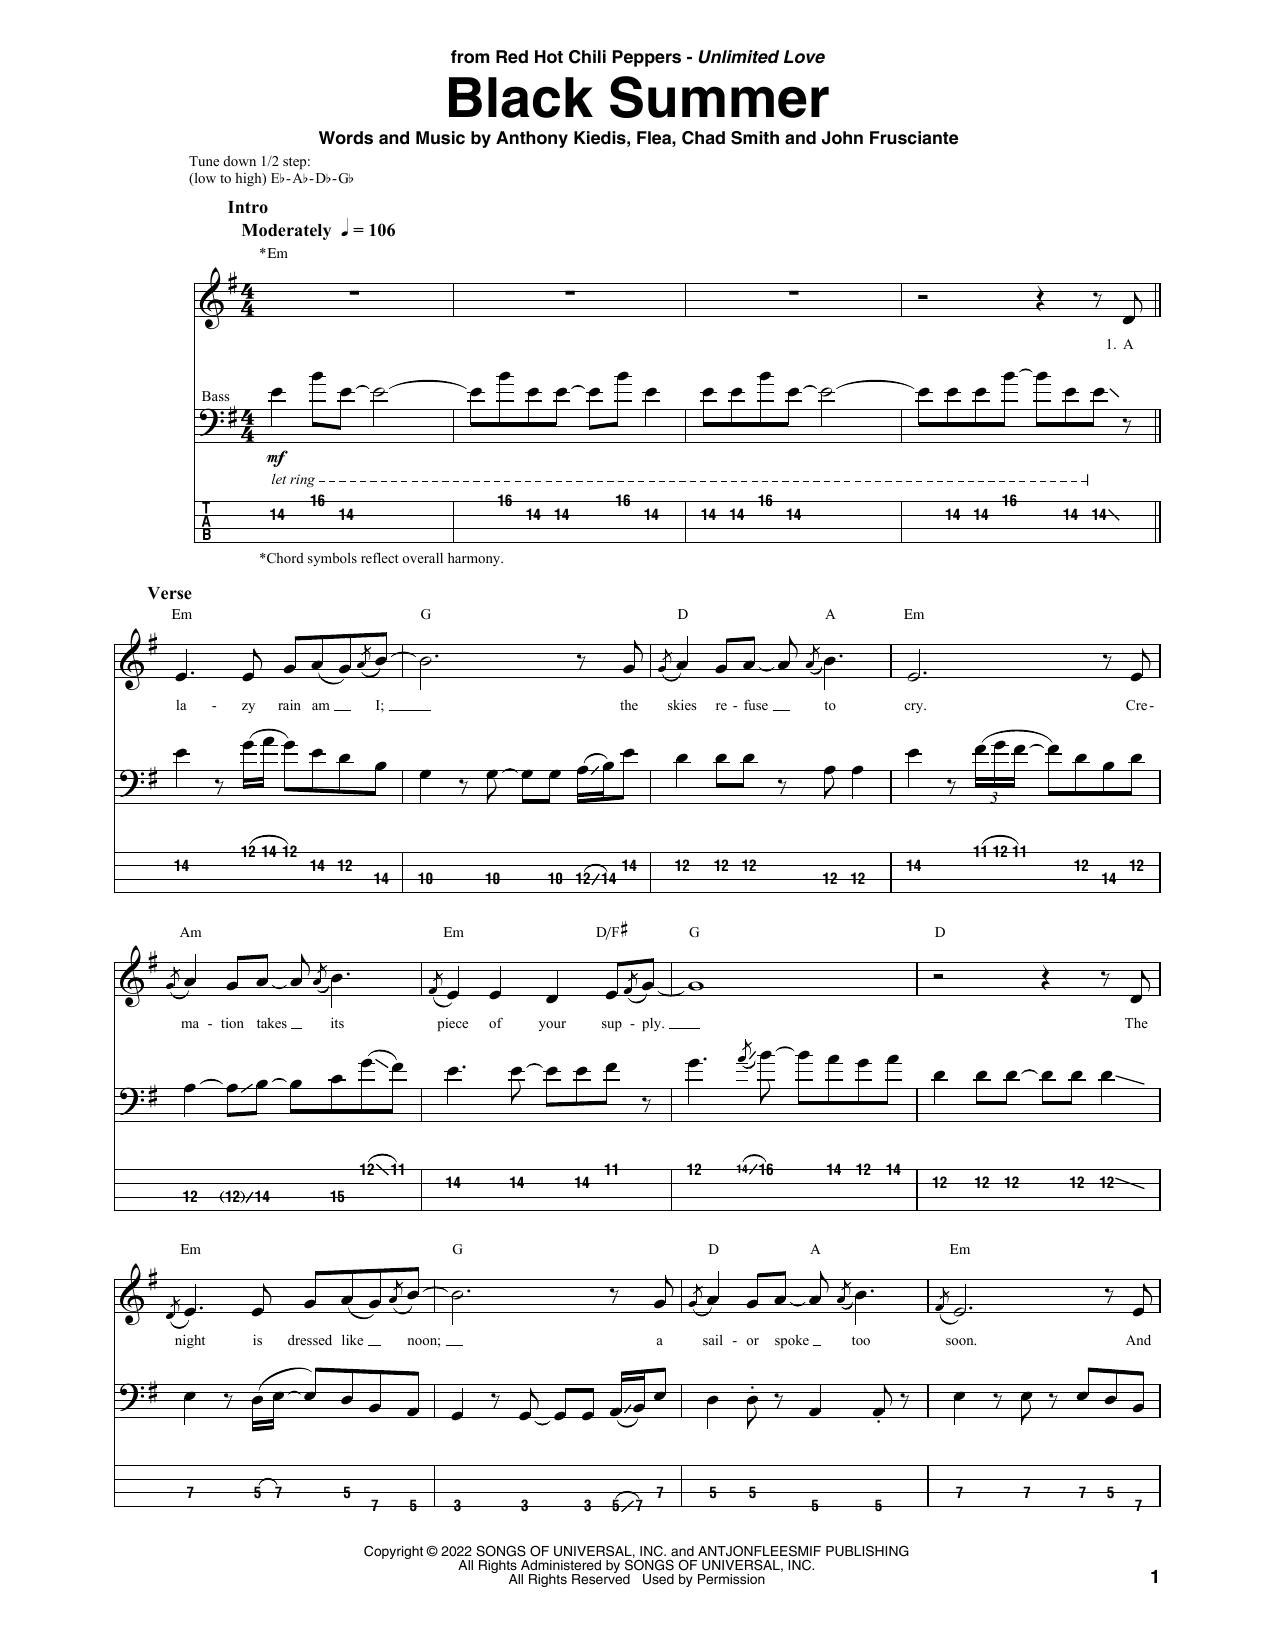 Download Red Hot Chili Peppers Black Summer Sheet Music